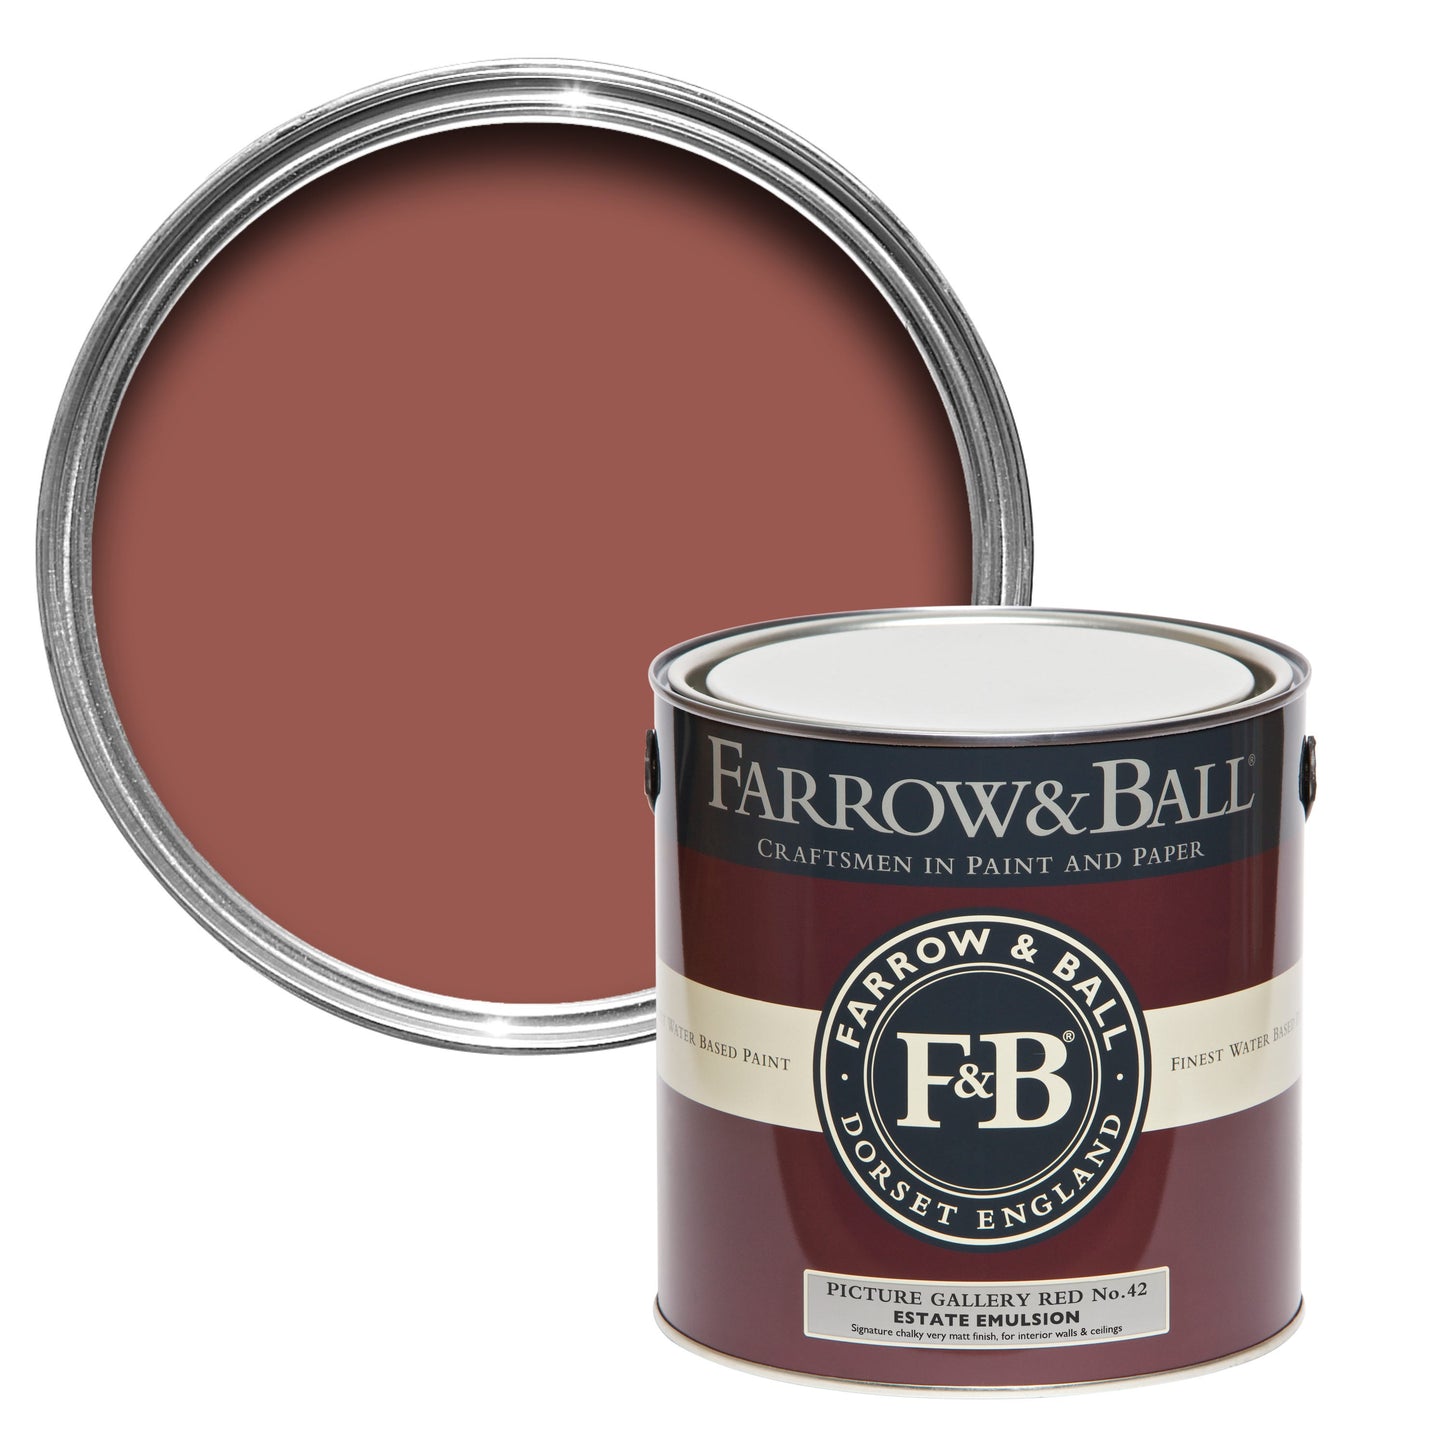 2.5L Exterior Eggshell Picture Gallery Red No.42